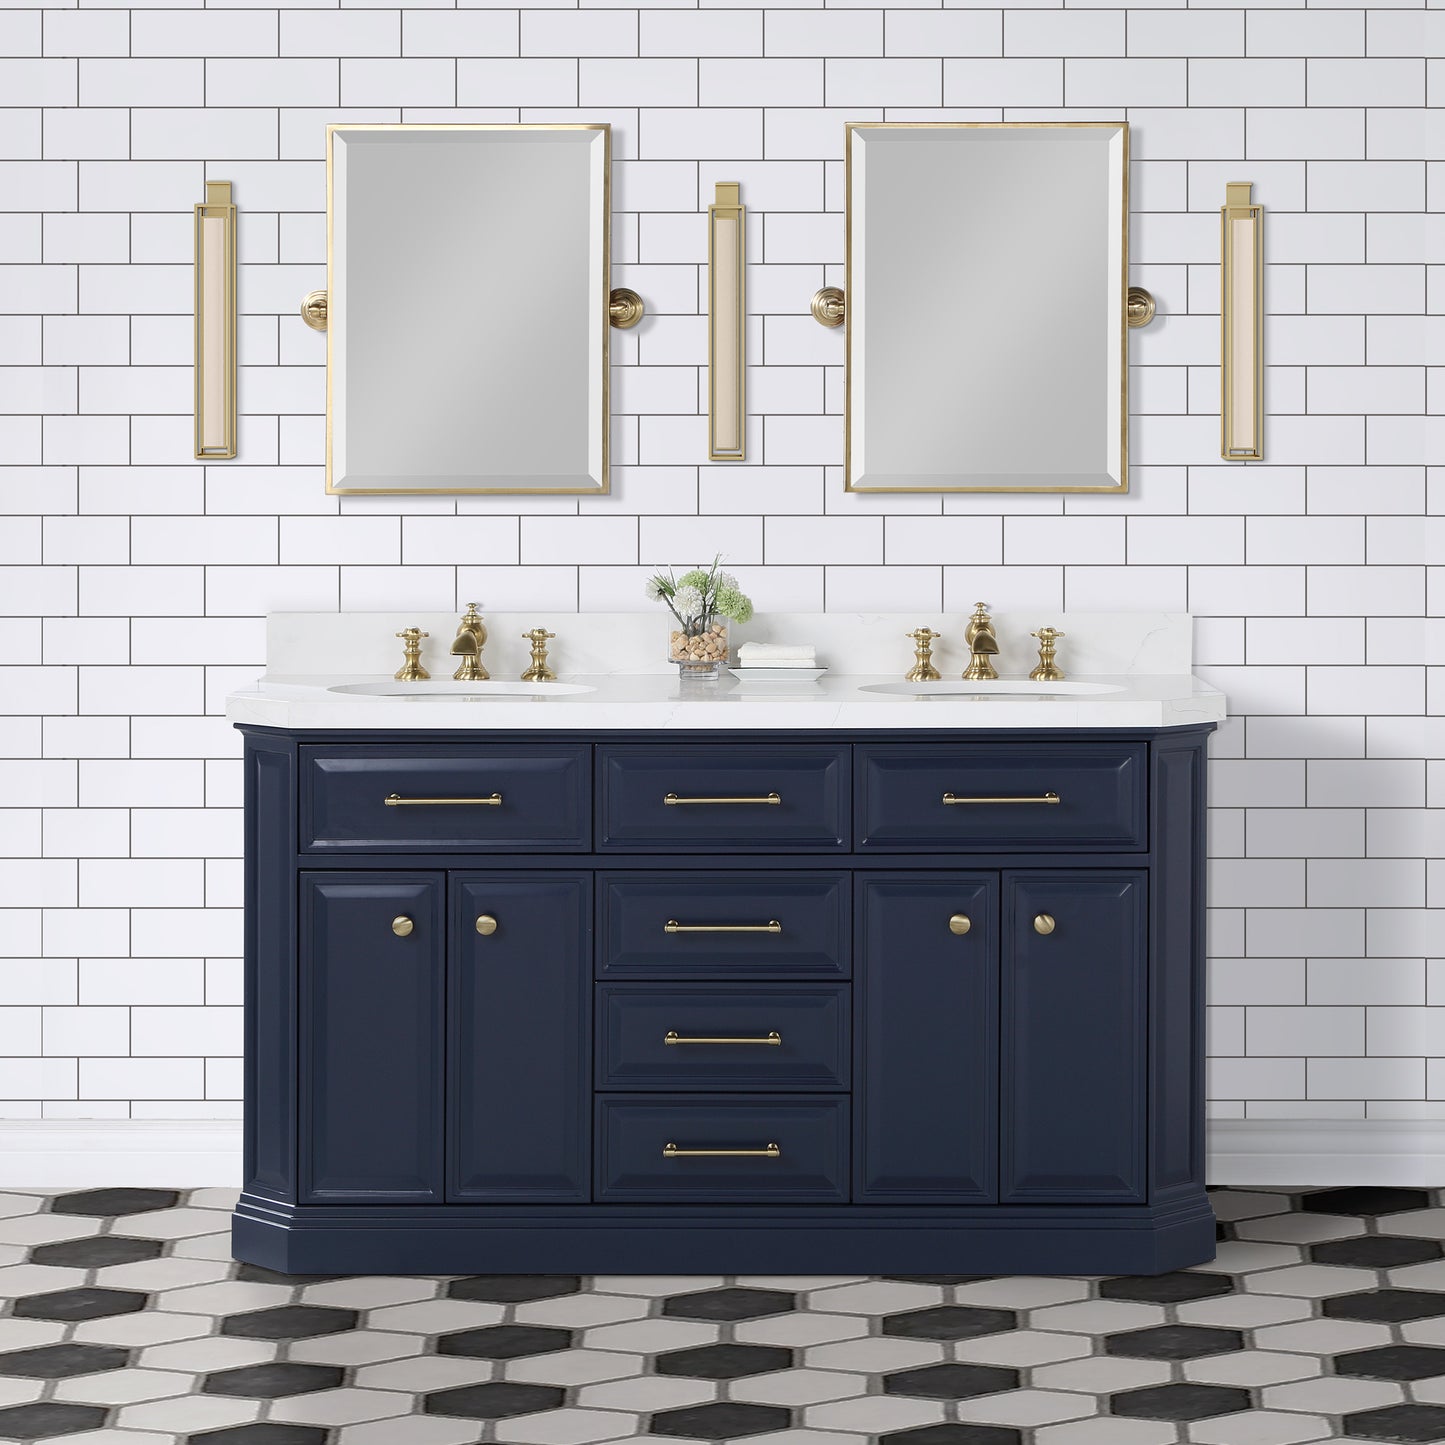 Water Creation Palace 60" Inch Double Sink White Quartz Countertop Vanity in Monarch Blue with Waterfall Faucets - Luxe Bathroom Vanities